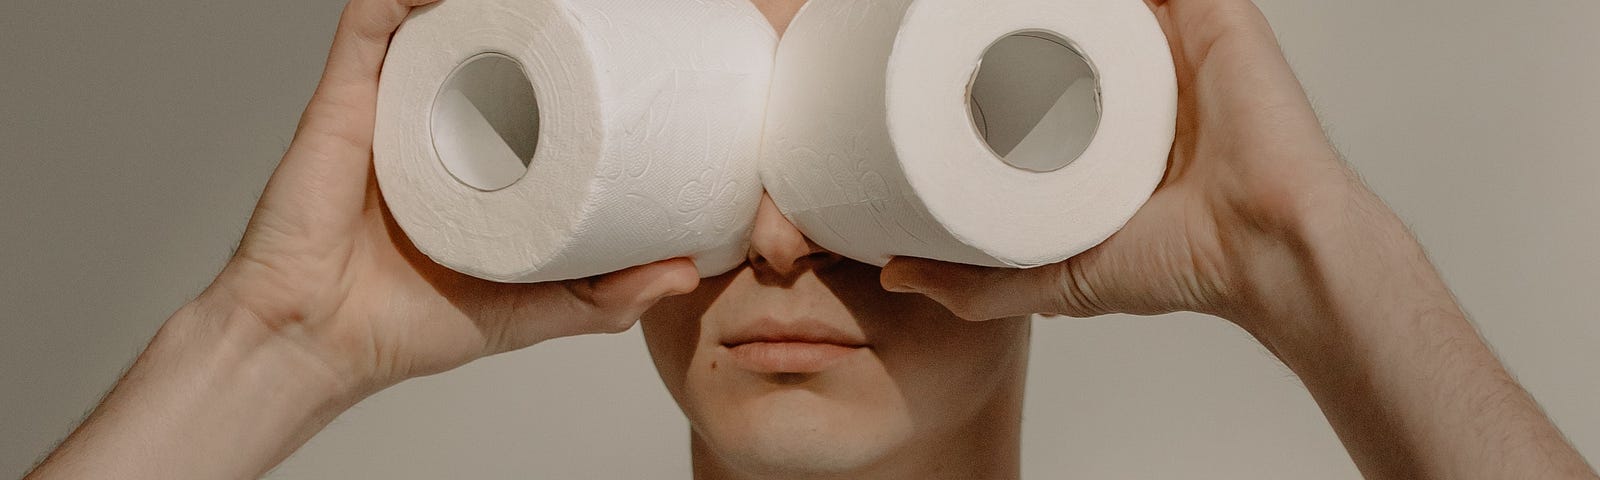 Seinfeld. A man looking through 2 roles of toilet paper.